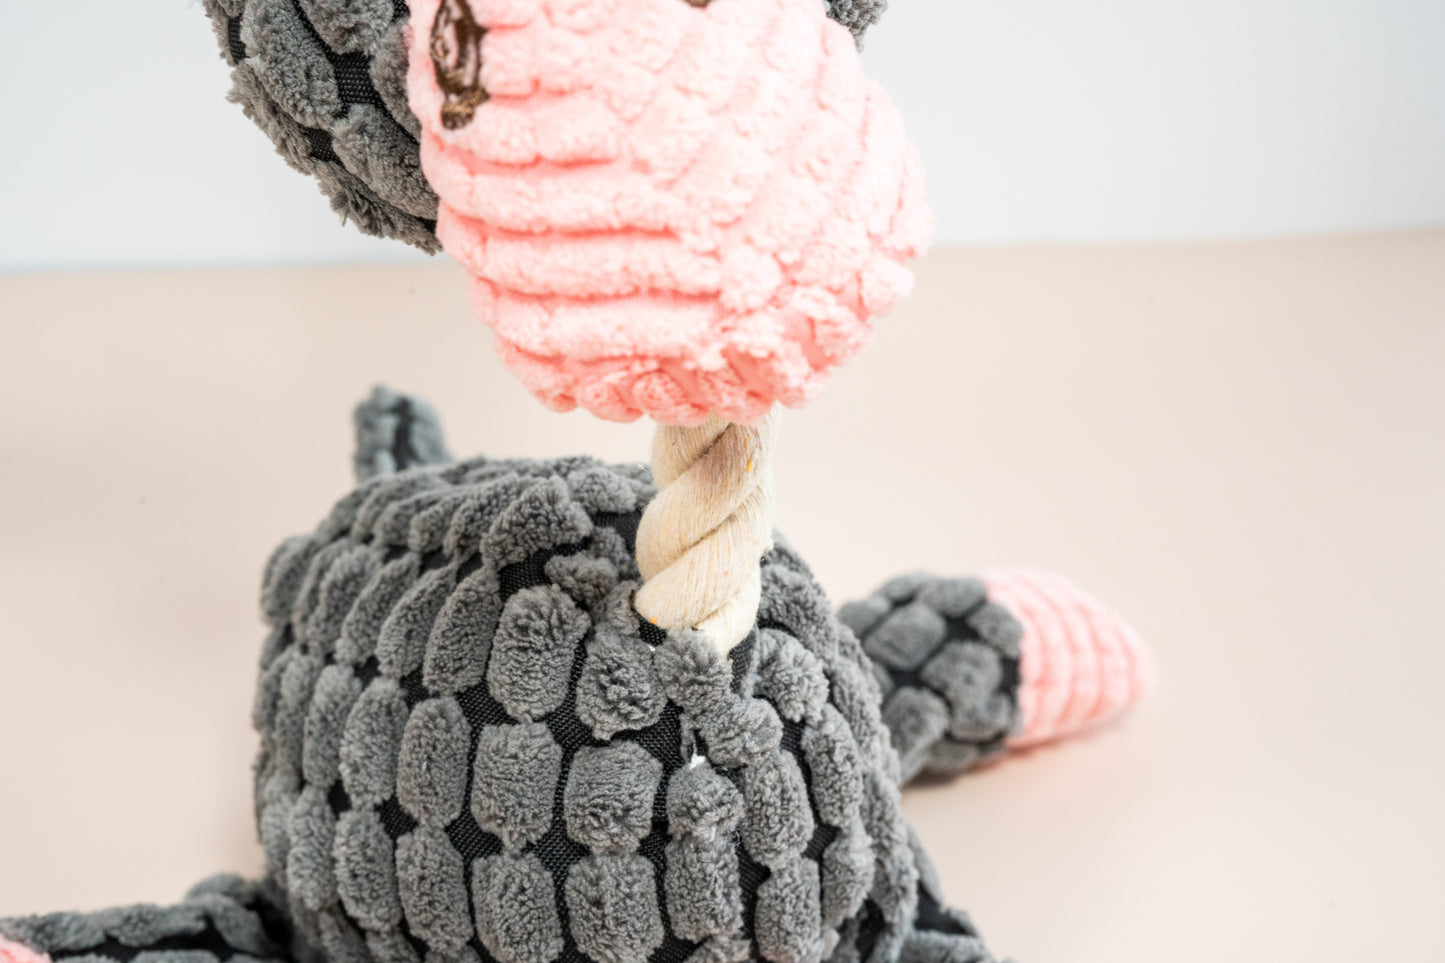 Close-up view of the rope neck of the donkey-shaped dog plush.